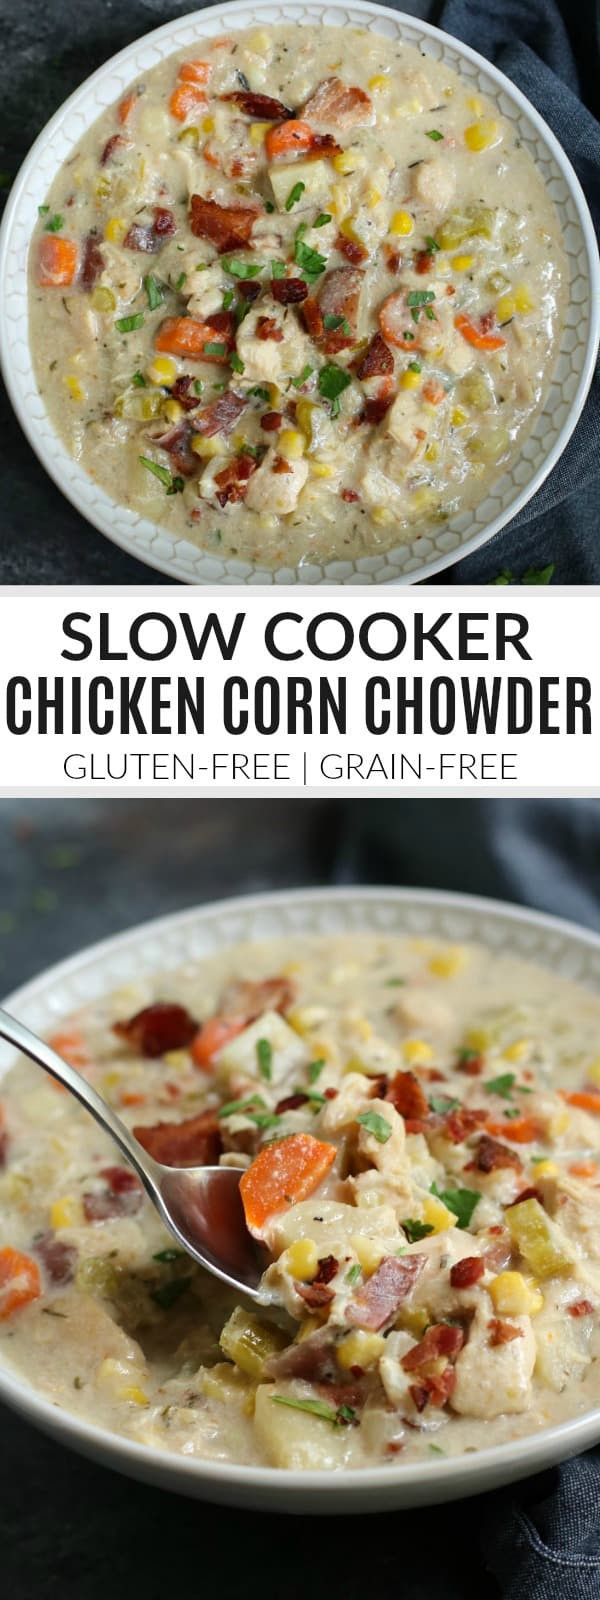 Slow Cooker Chicken Corn Chowder
 Slow Cooker Chicken Corn Chowder The Real Food Dietitians